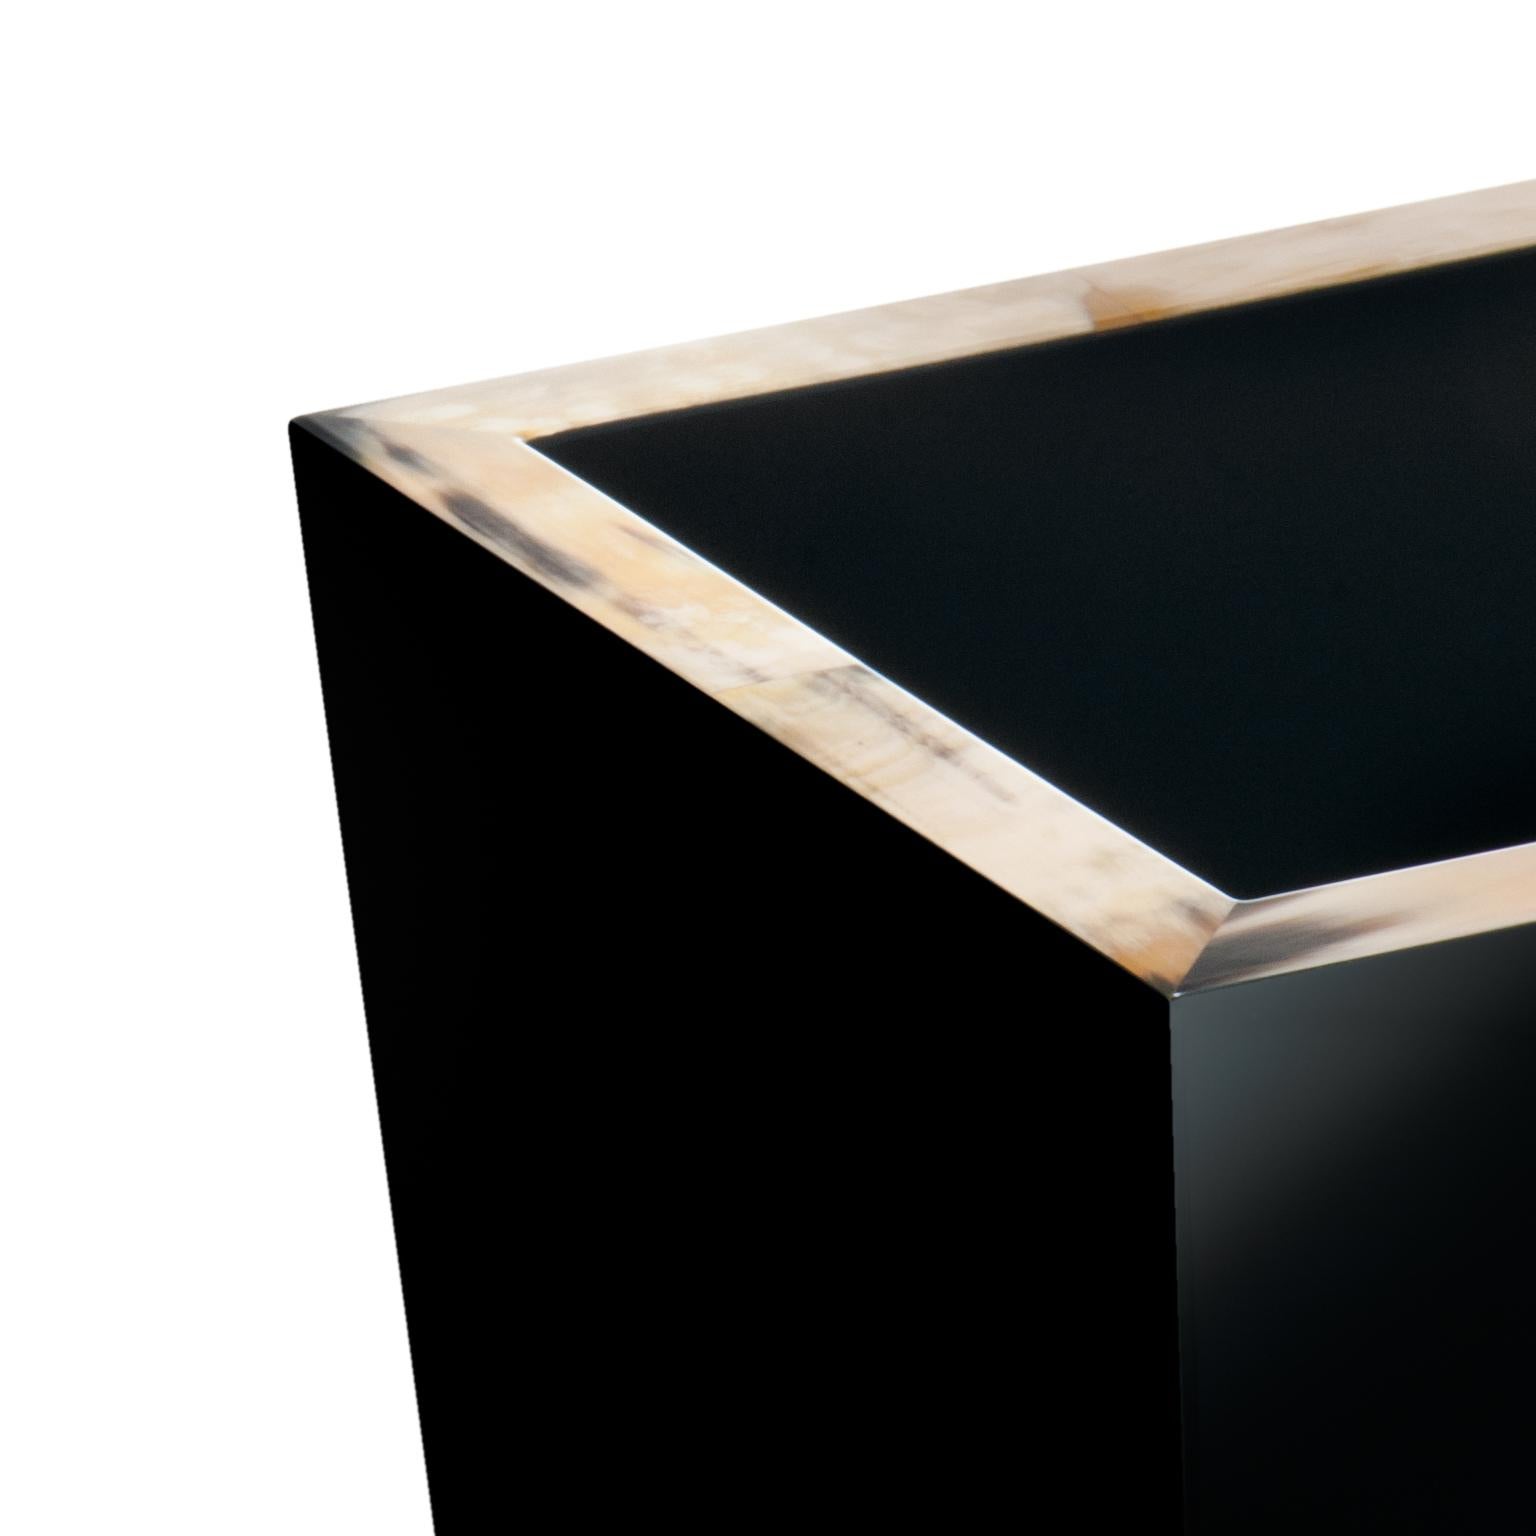 Handcrafted of wood, Fedro waste paper basket features and inverted pyramidal shape finished in high-gloss black lacquer. Embellished by an elegant edging in Corno Italiano, this waste basket is a must-have addition to a home or office space. Small